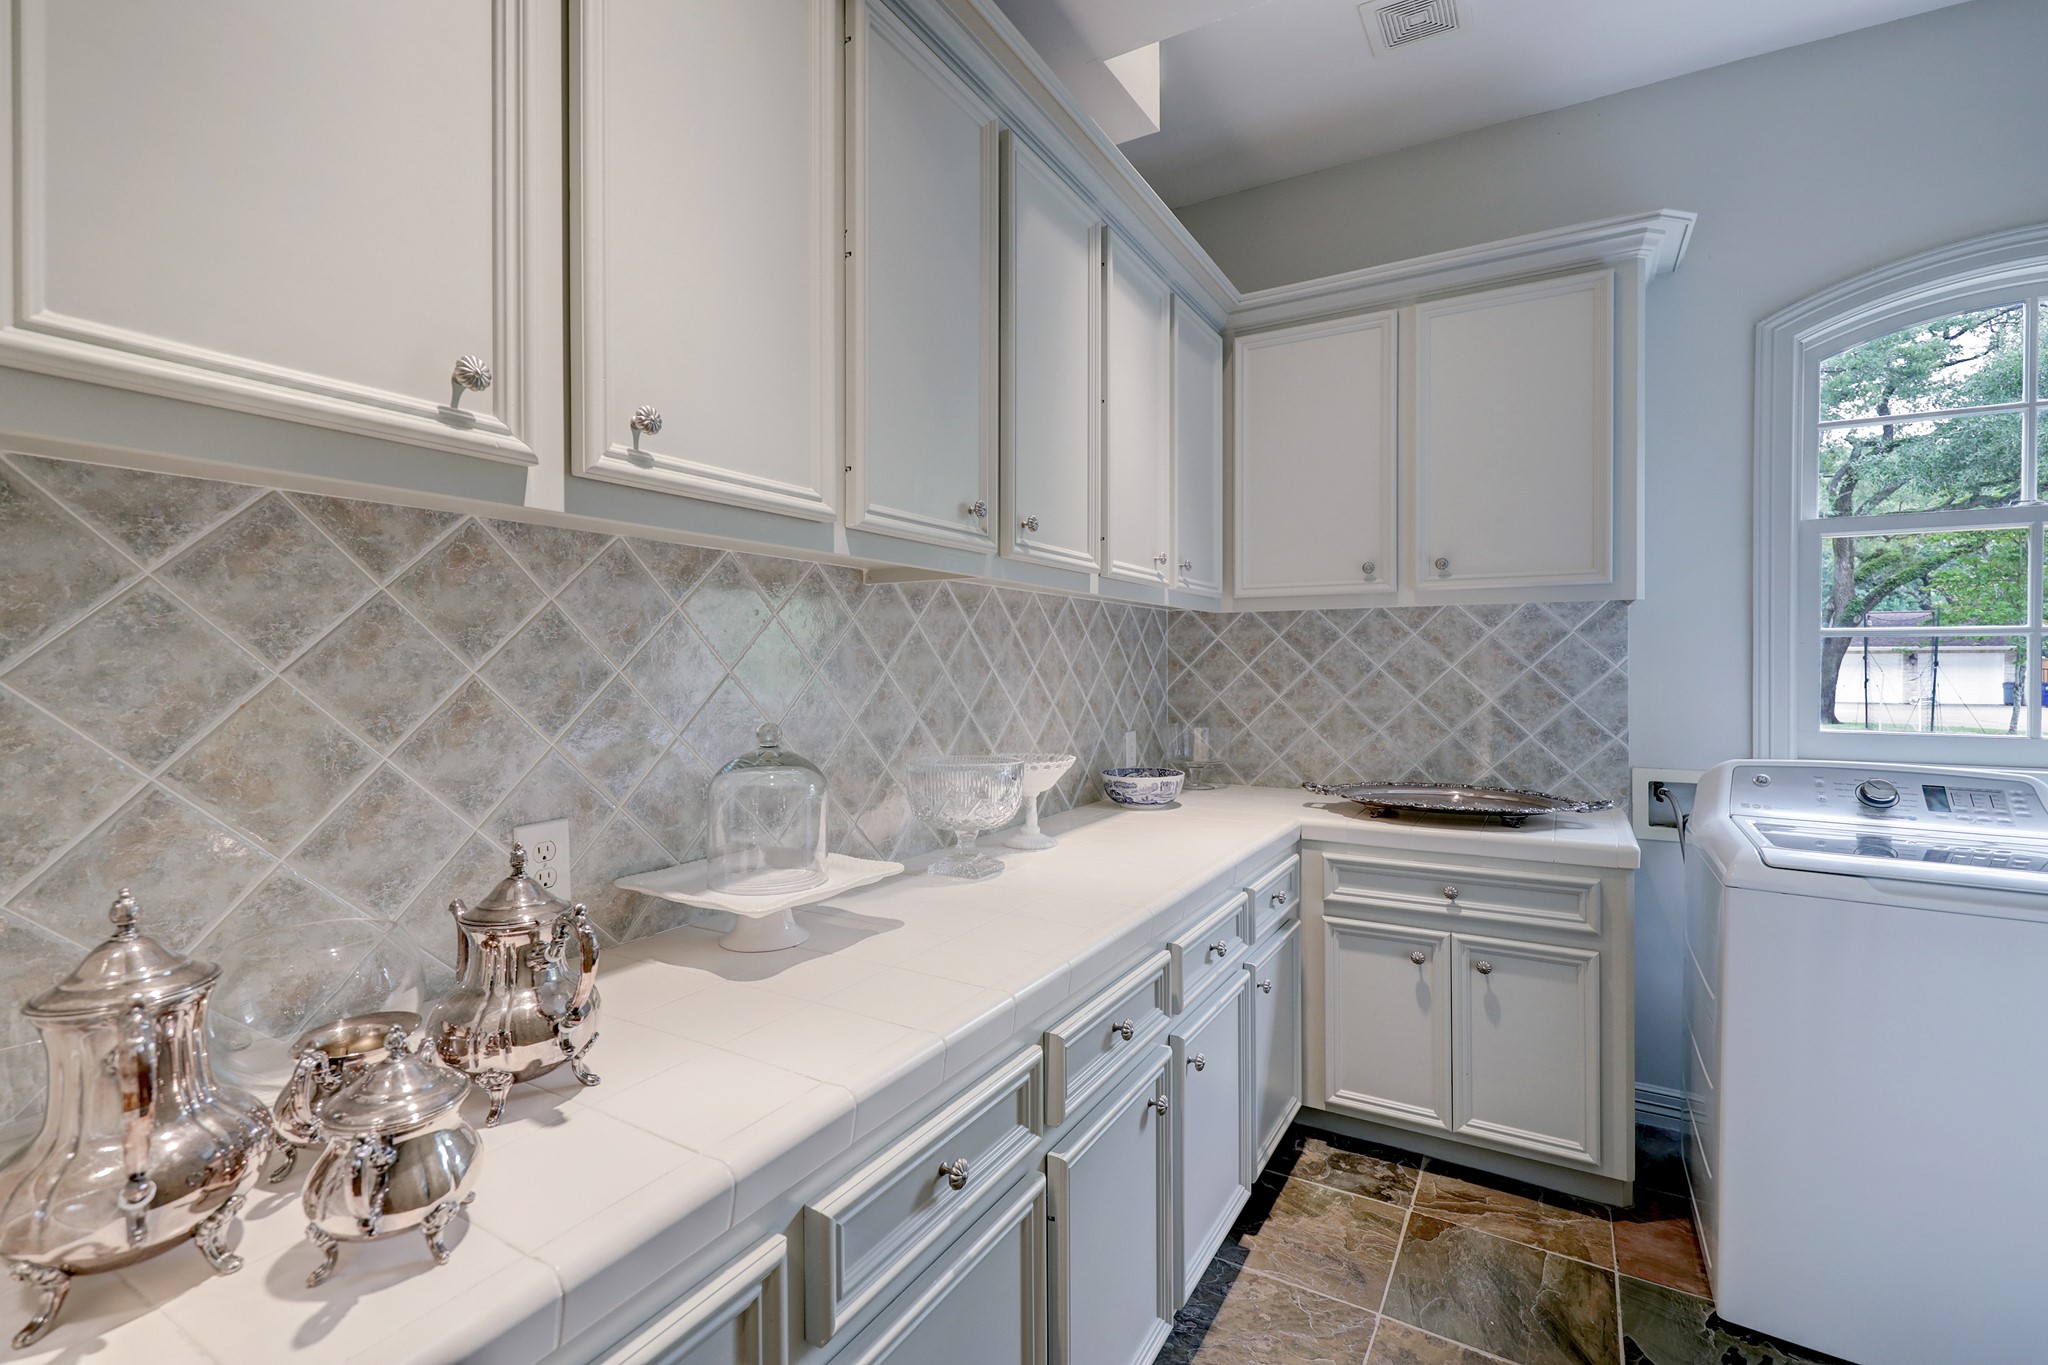 Utility room with storage off of butler's pantry easily serves as storage overflow, or catering space. An appliance nook is discreetly tucked away.